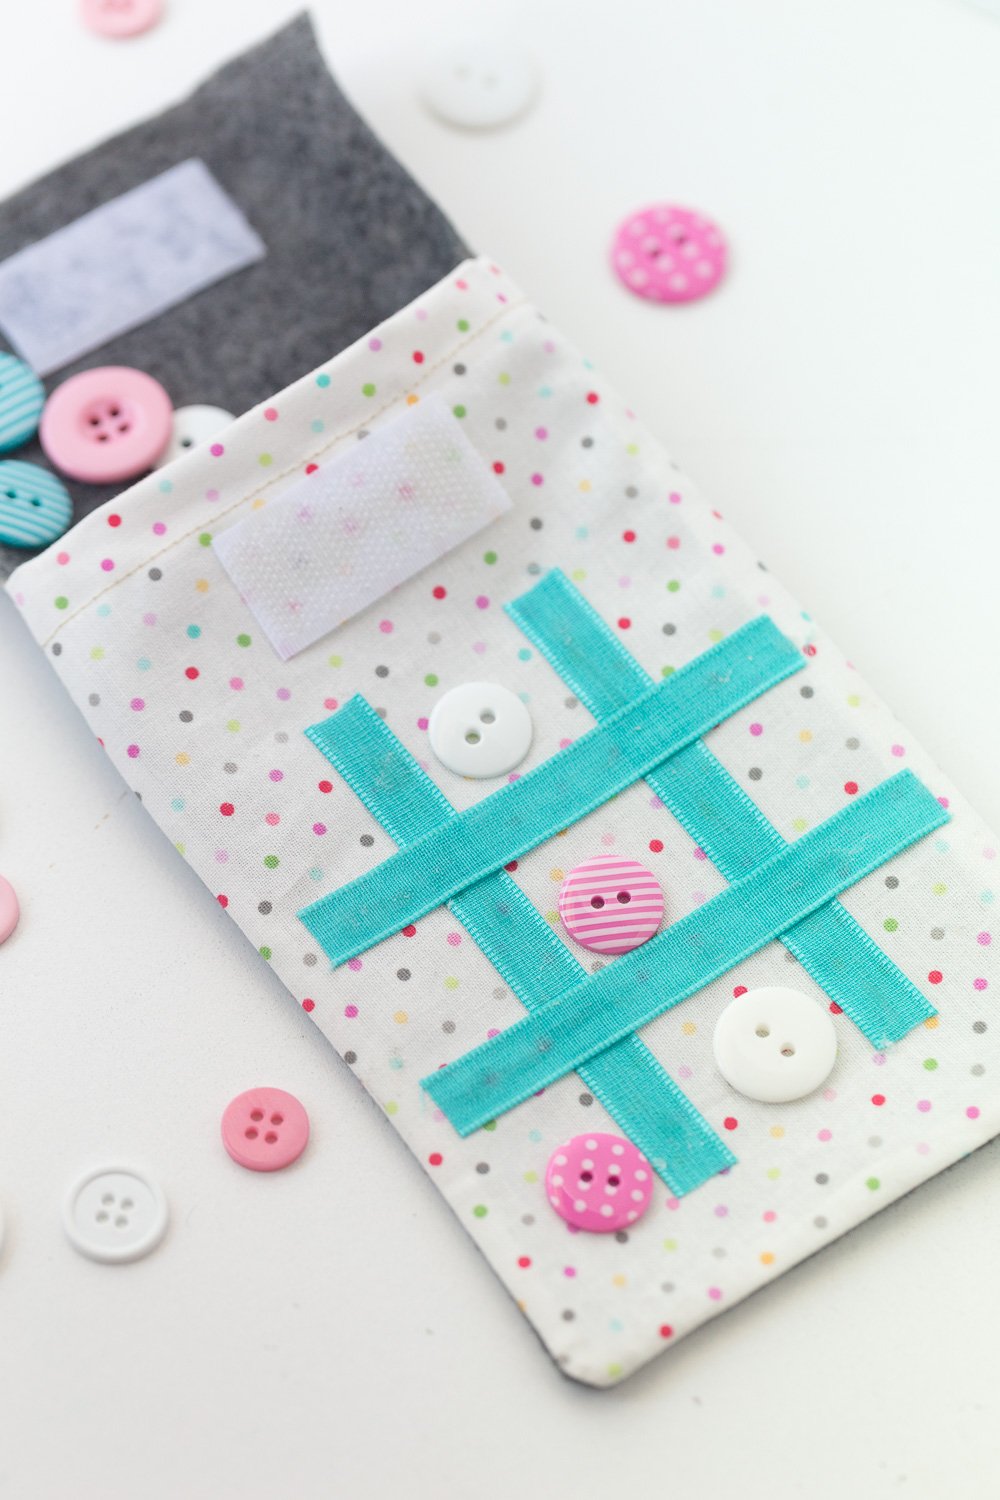 On the Go Tic Tac Toe Sewing Tutorial-Make this cute little game for road trips, waiting rooms or wherever you are going! #sew #sewing #pattern #kids